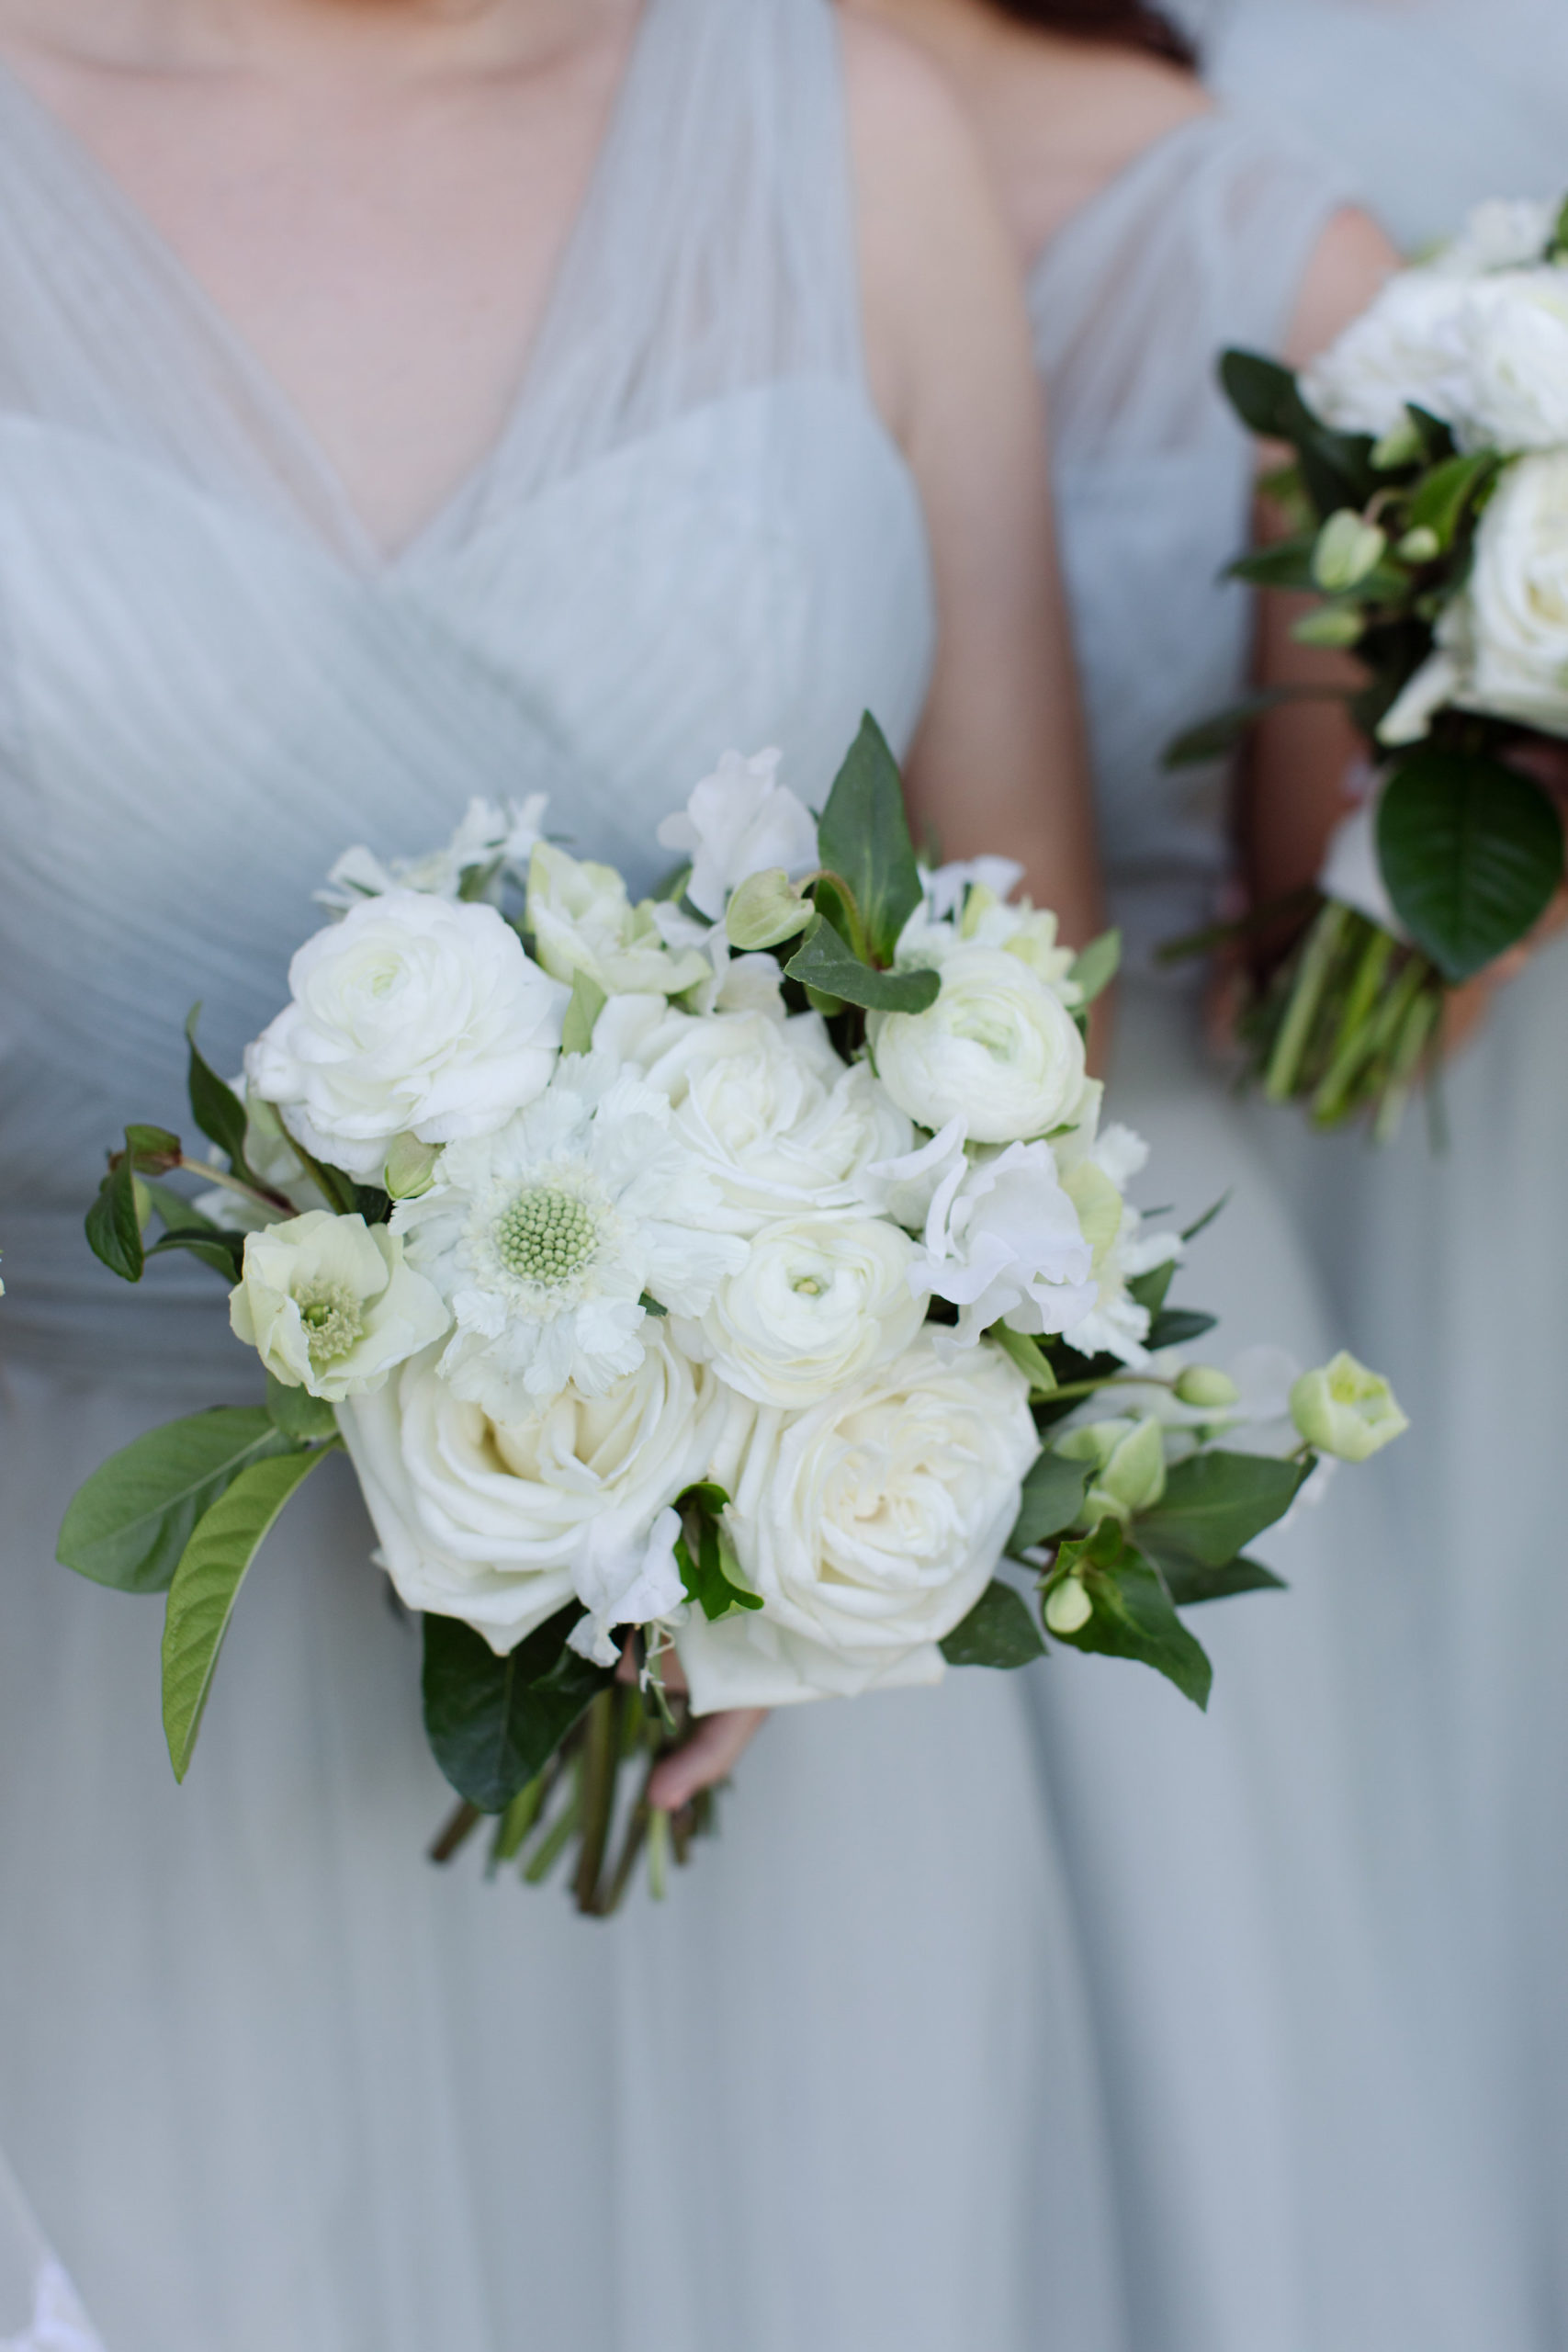 Floral Inspiration - Formal - White &amp; Green - Bridesmaids in Champagne or Black